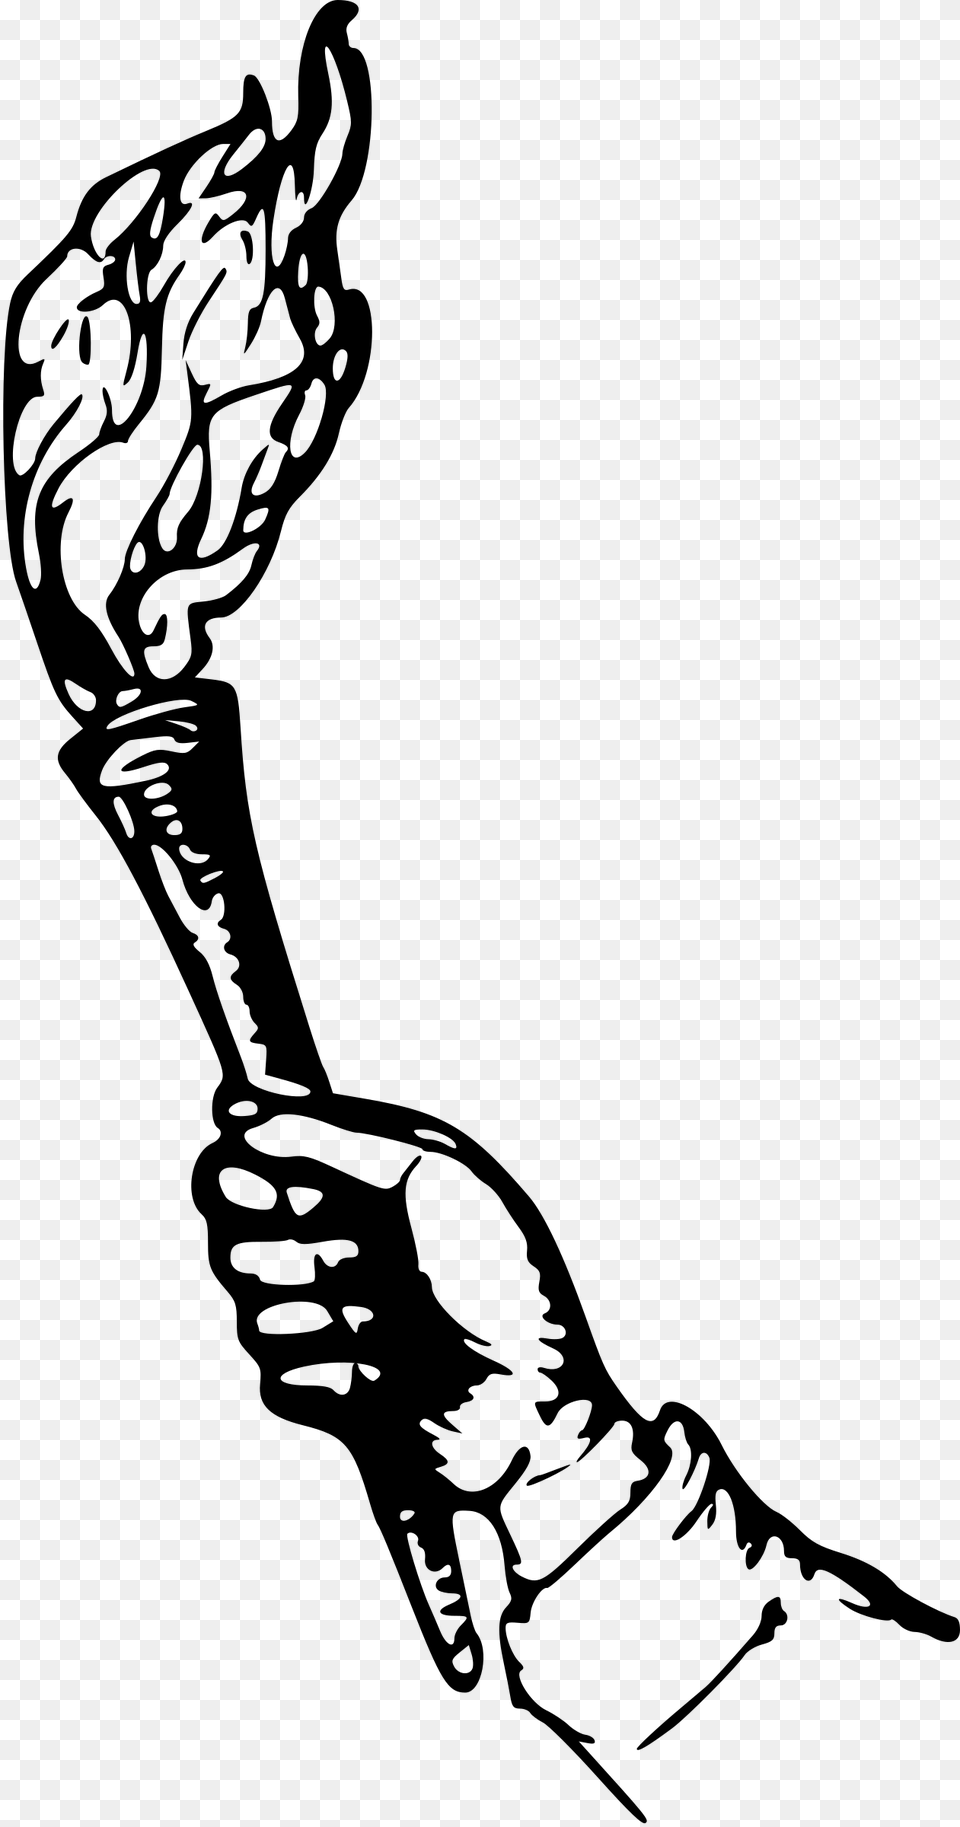 Hand Holding Book Drawing At Getdrawings Hand Holding Torch, Gray Free Png Download